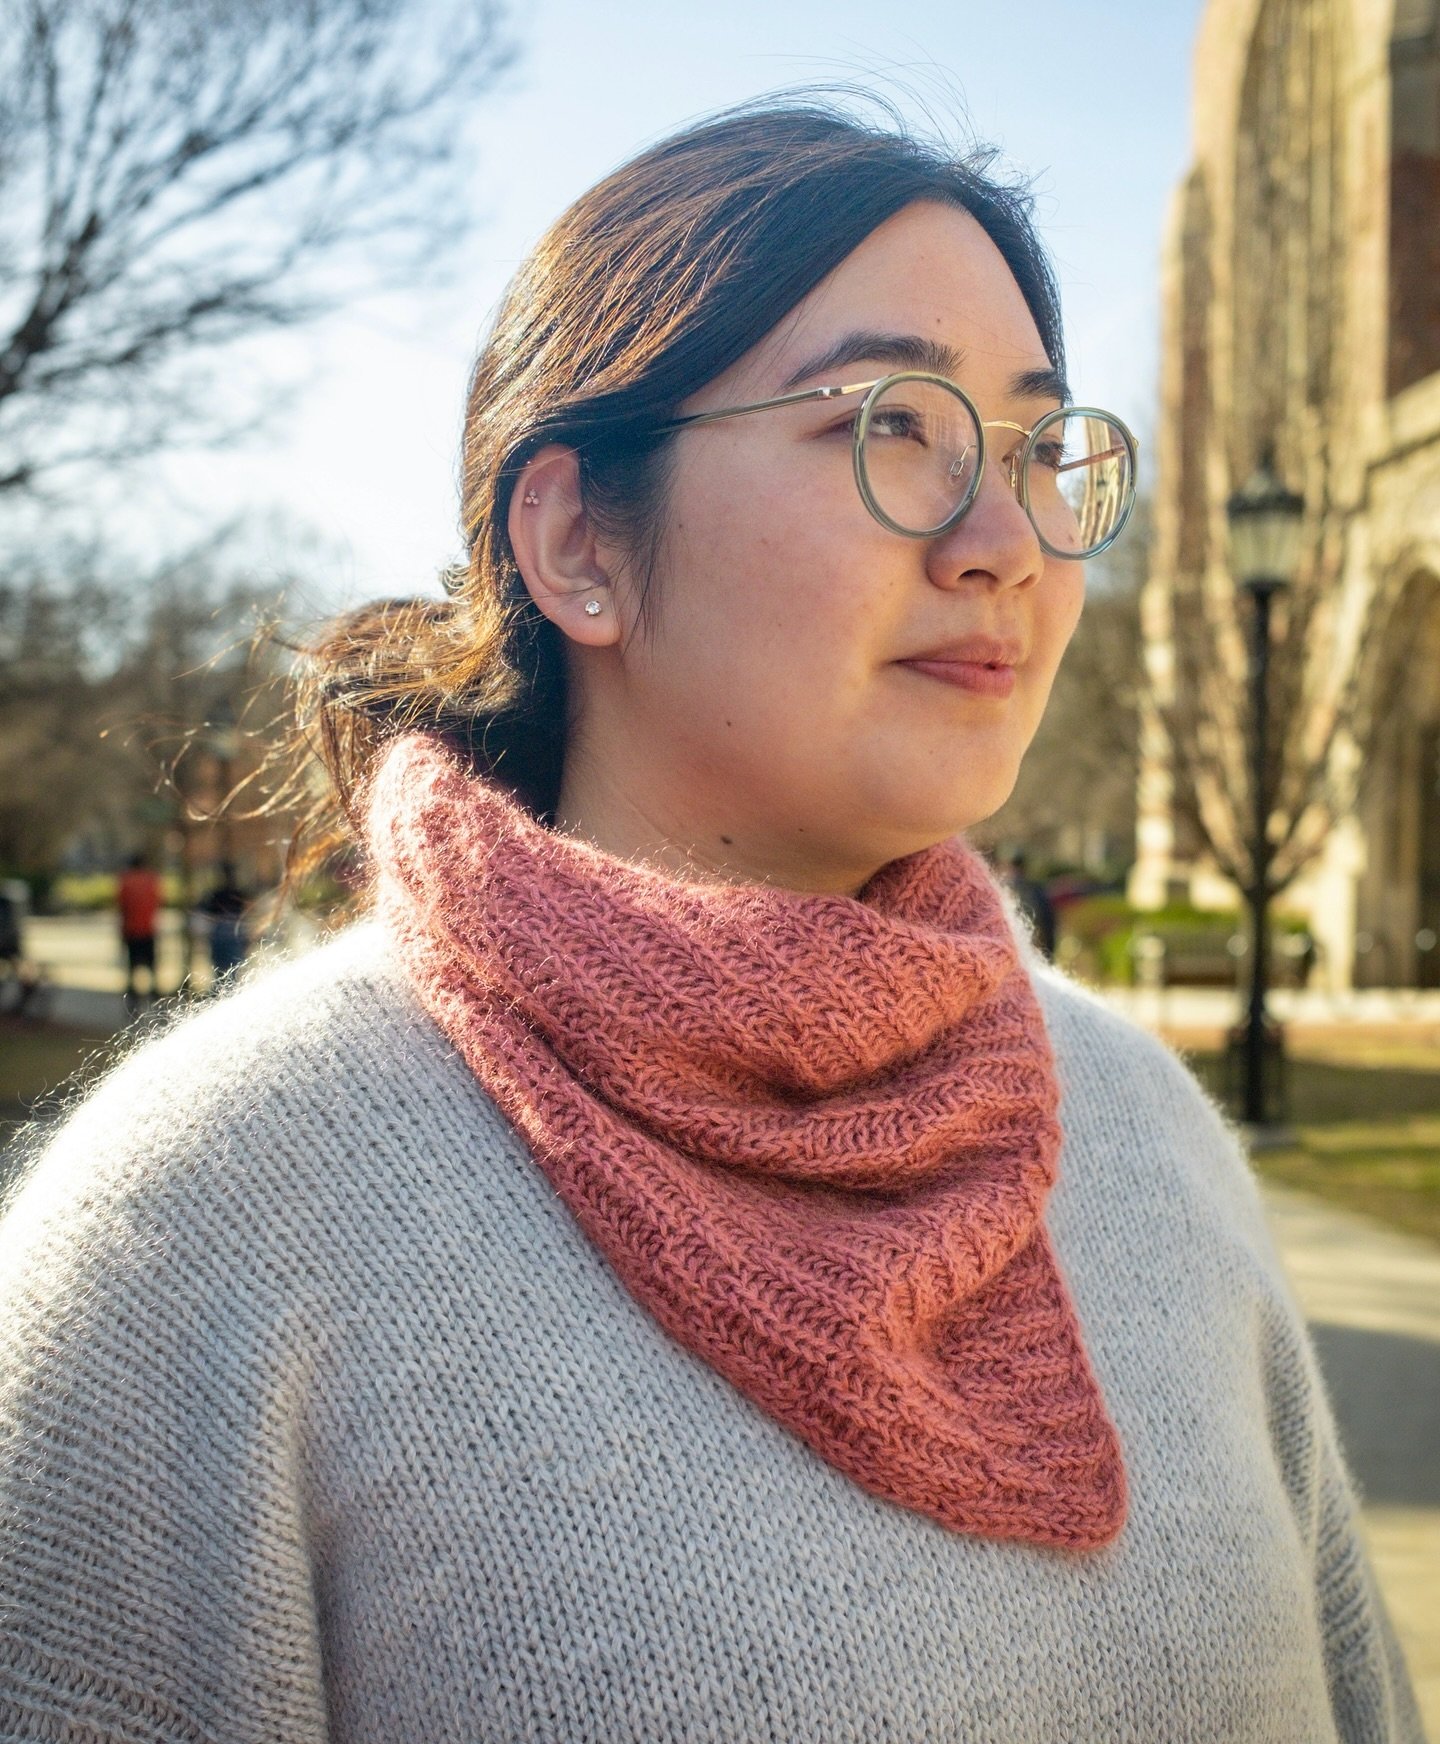 🎉 SURPRISE!! 🎉

happy release day to the #BriocheBiasCowl 🥳 I&rsquo;ve been keeping this secret since February and it feels so good to finally share with you all!!
 
I designed this cowl for La Mercerie, as their FREE knitting pattern for the #Pug